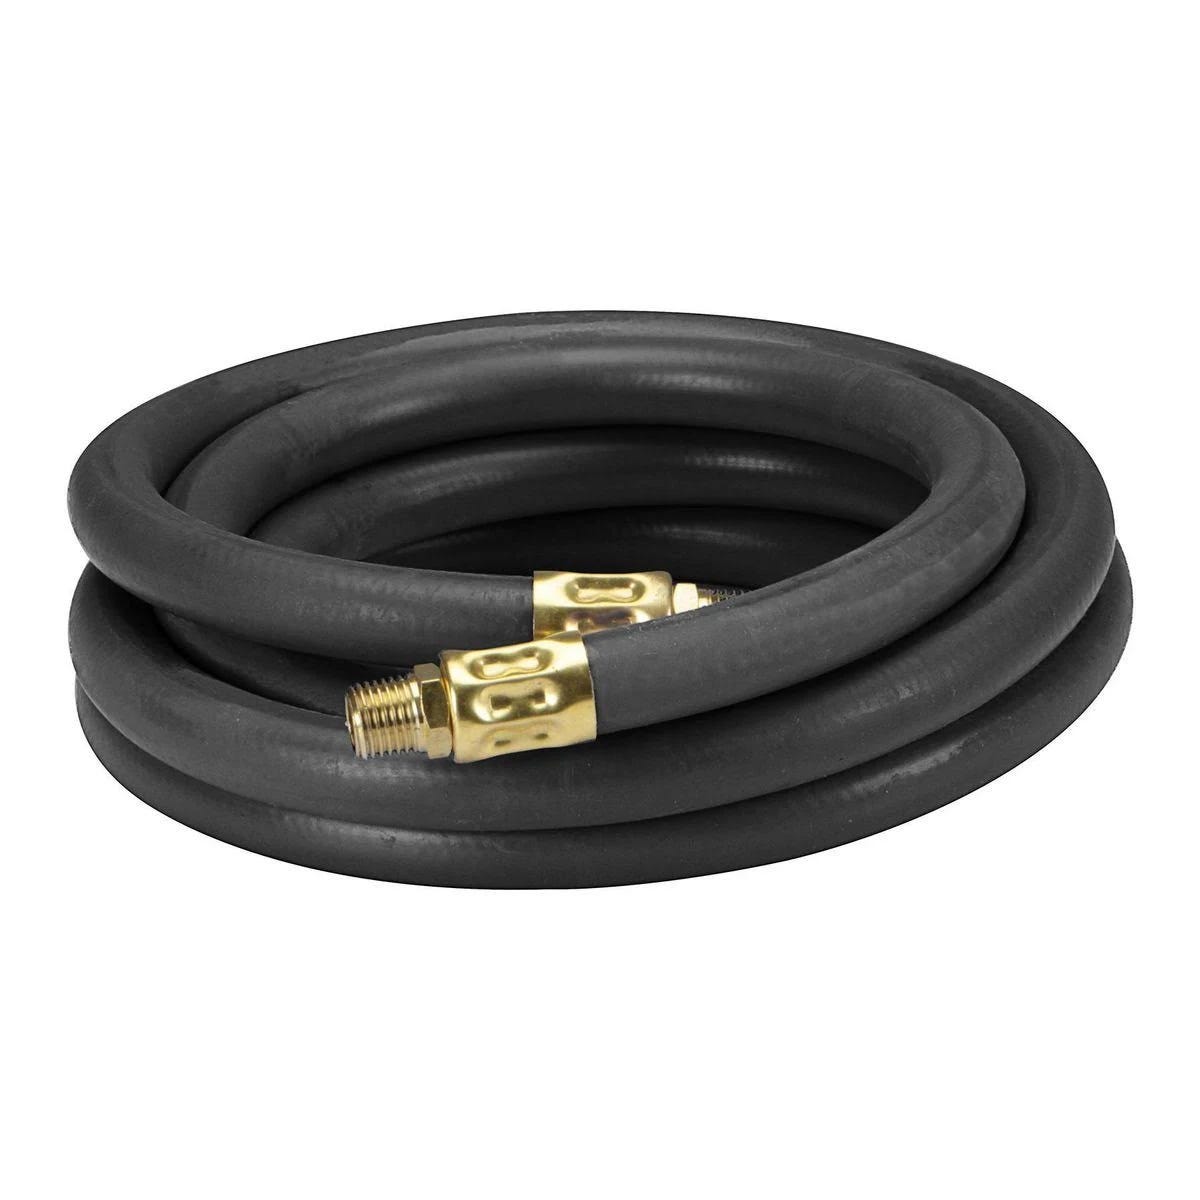 Durable Rubber Air Hose Remnant for Automotive and Workshop Use | Image